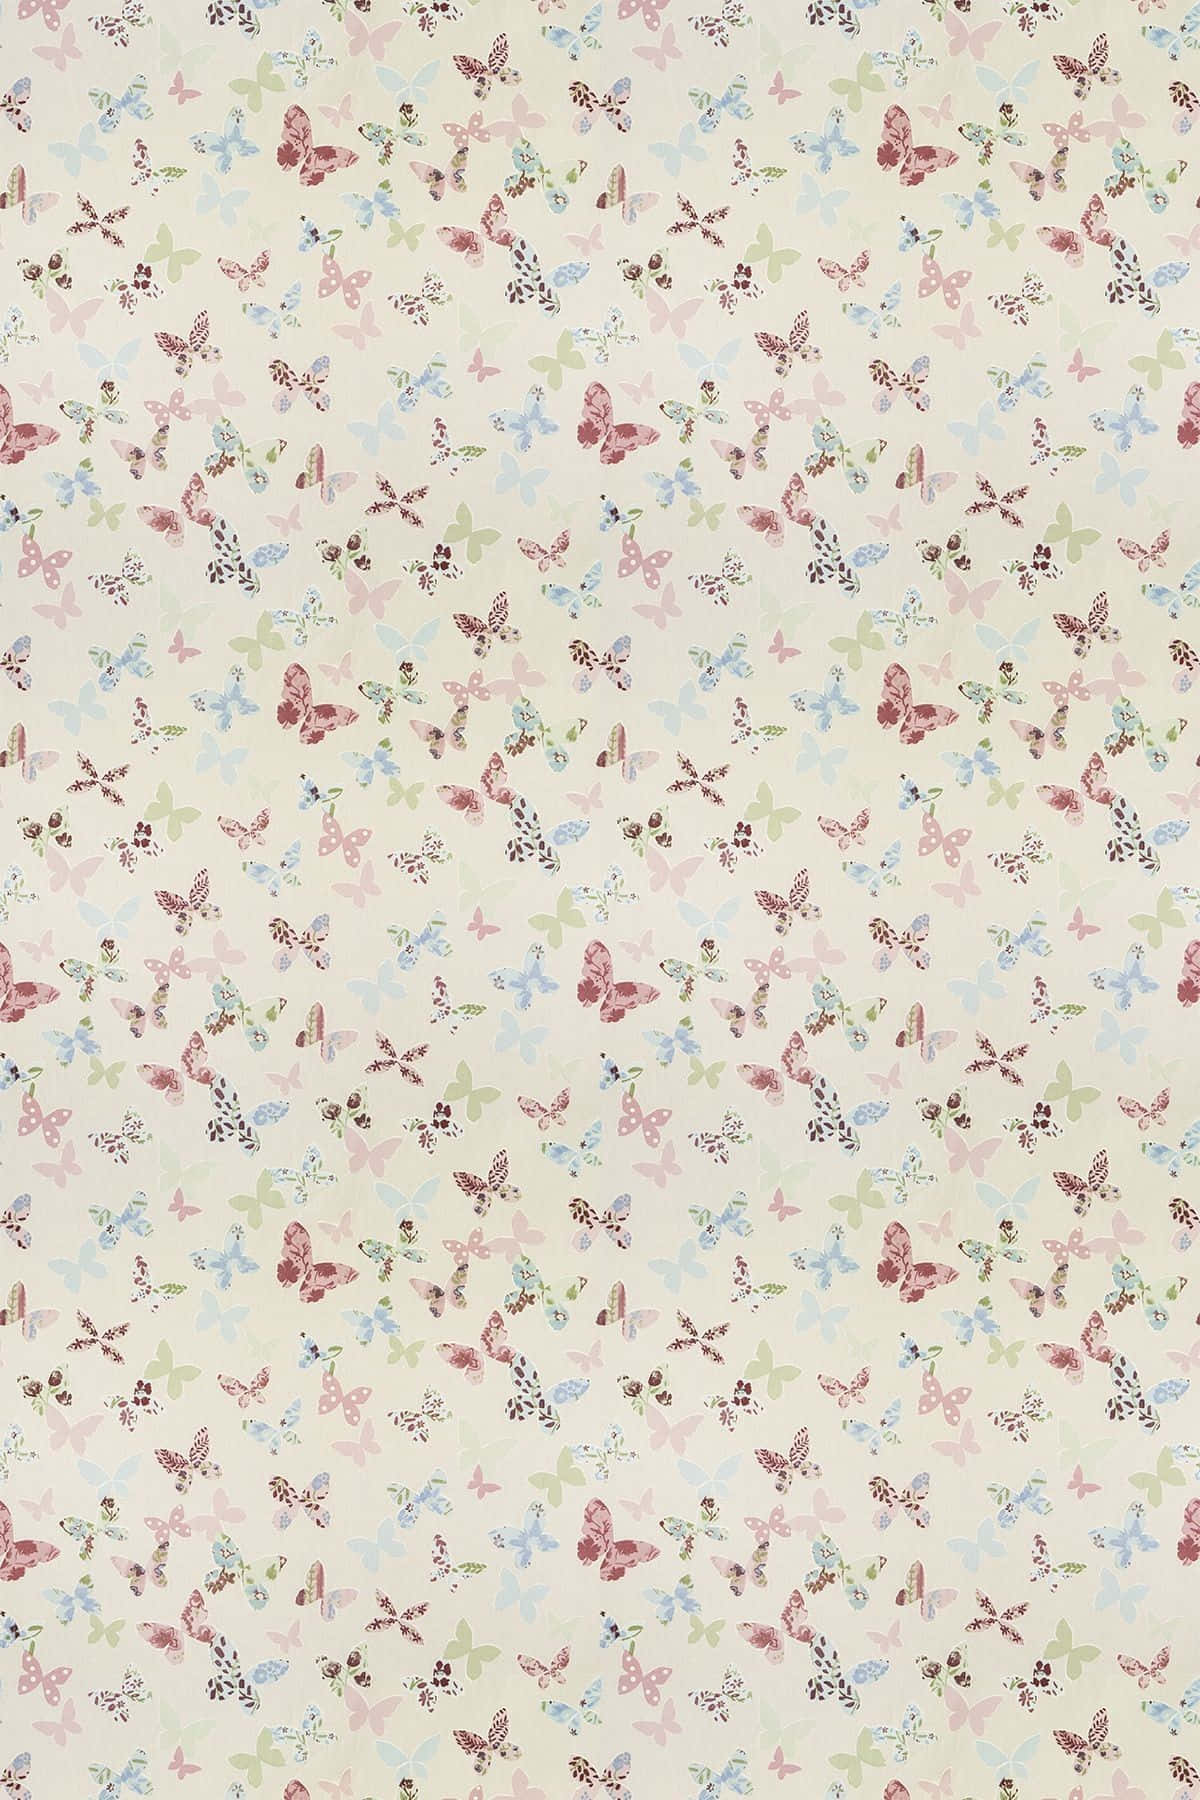 A Fabric With A Small Flower Pattern Wallpaper